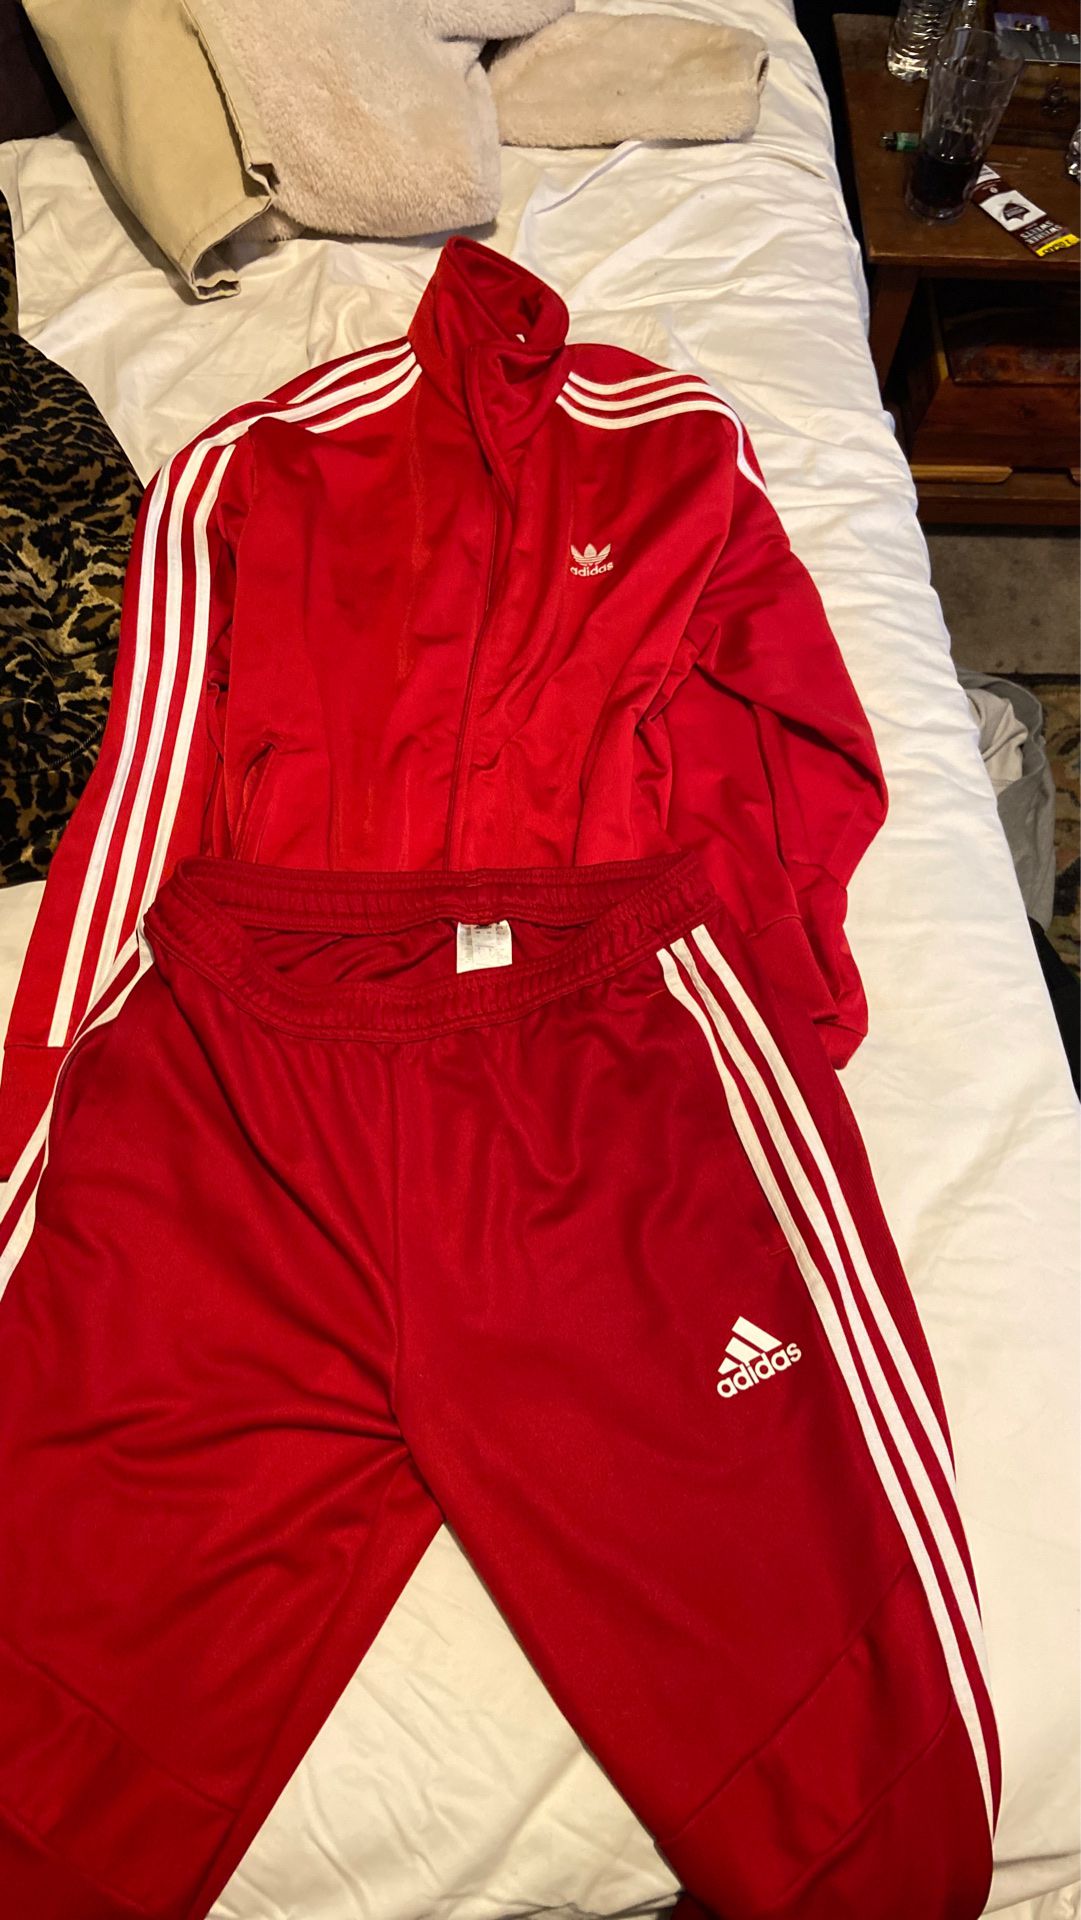 Red Adidas sweatsuit for sale